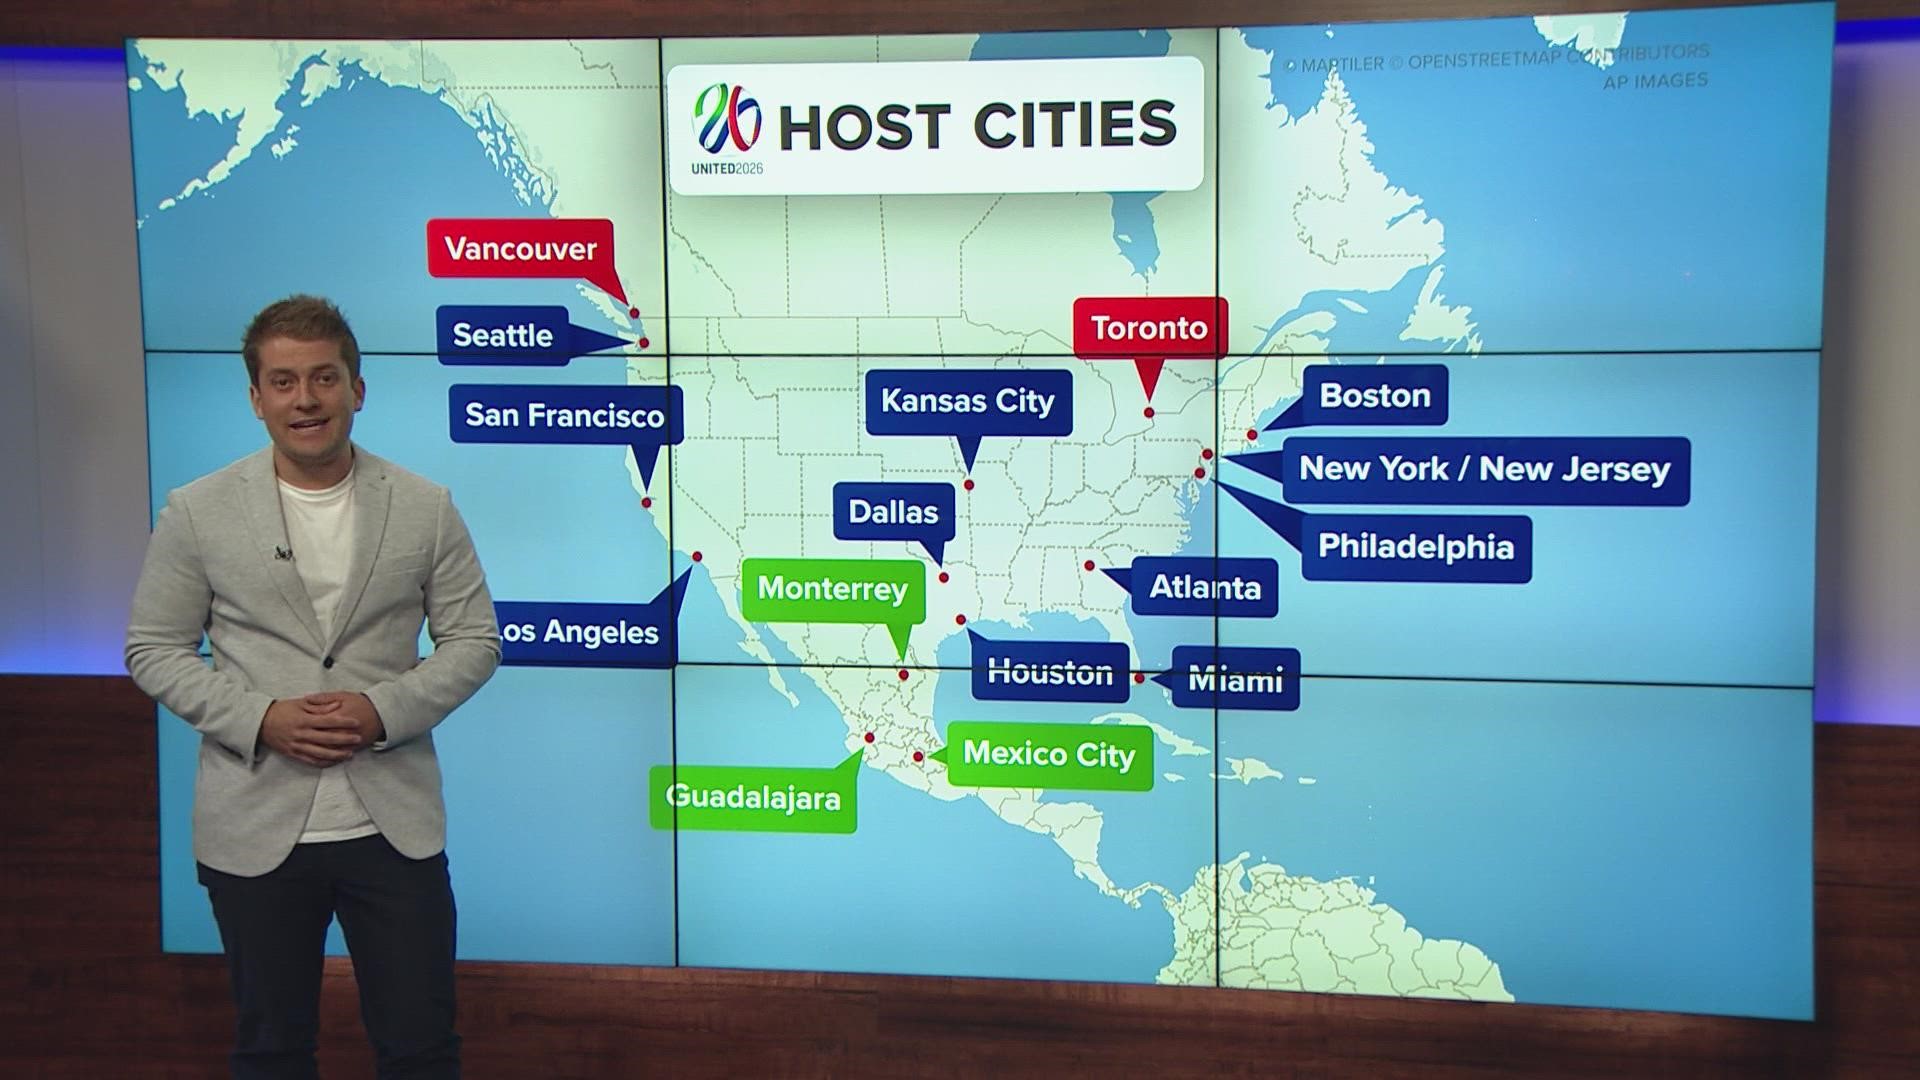 FIFA announced the 16 host cities Thursday afternoon, and Denver was not among them.